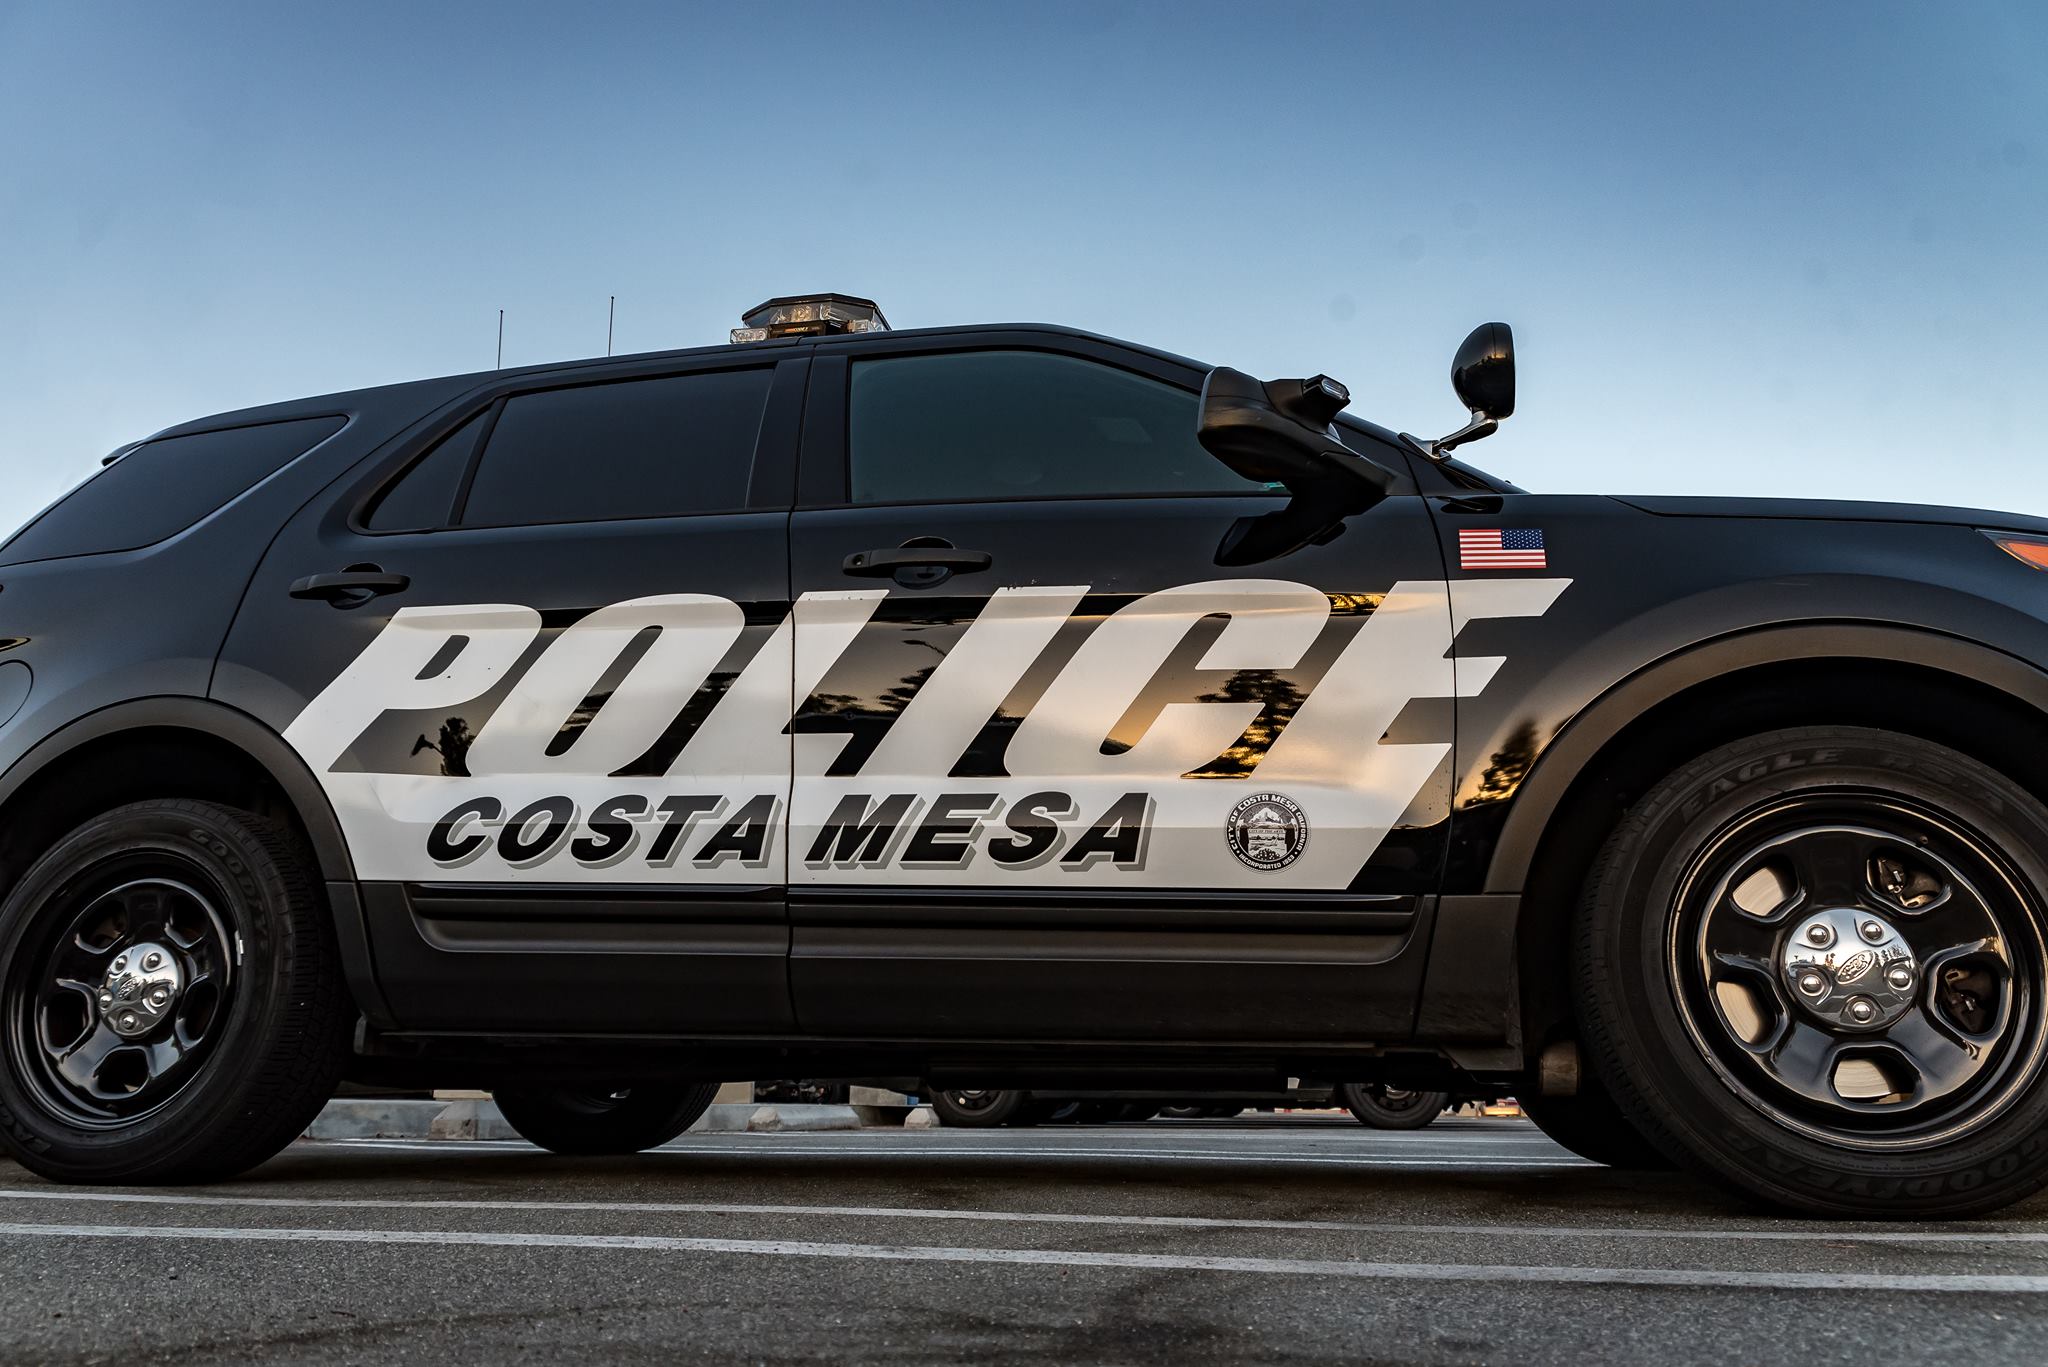 A Costa Mesa Police Department vehicle is seen in an undated file photo shared by the department.